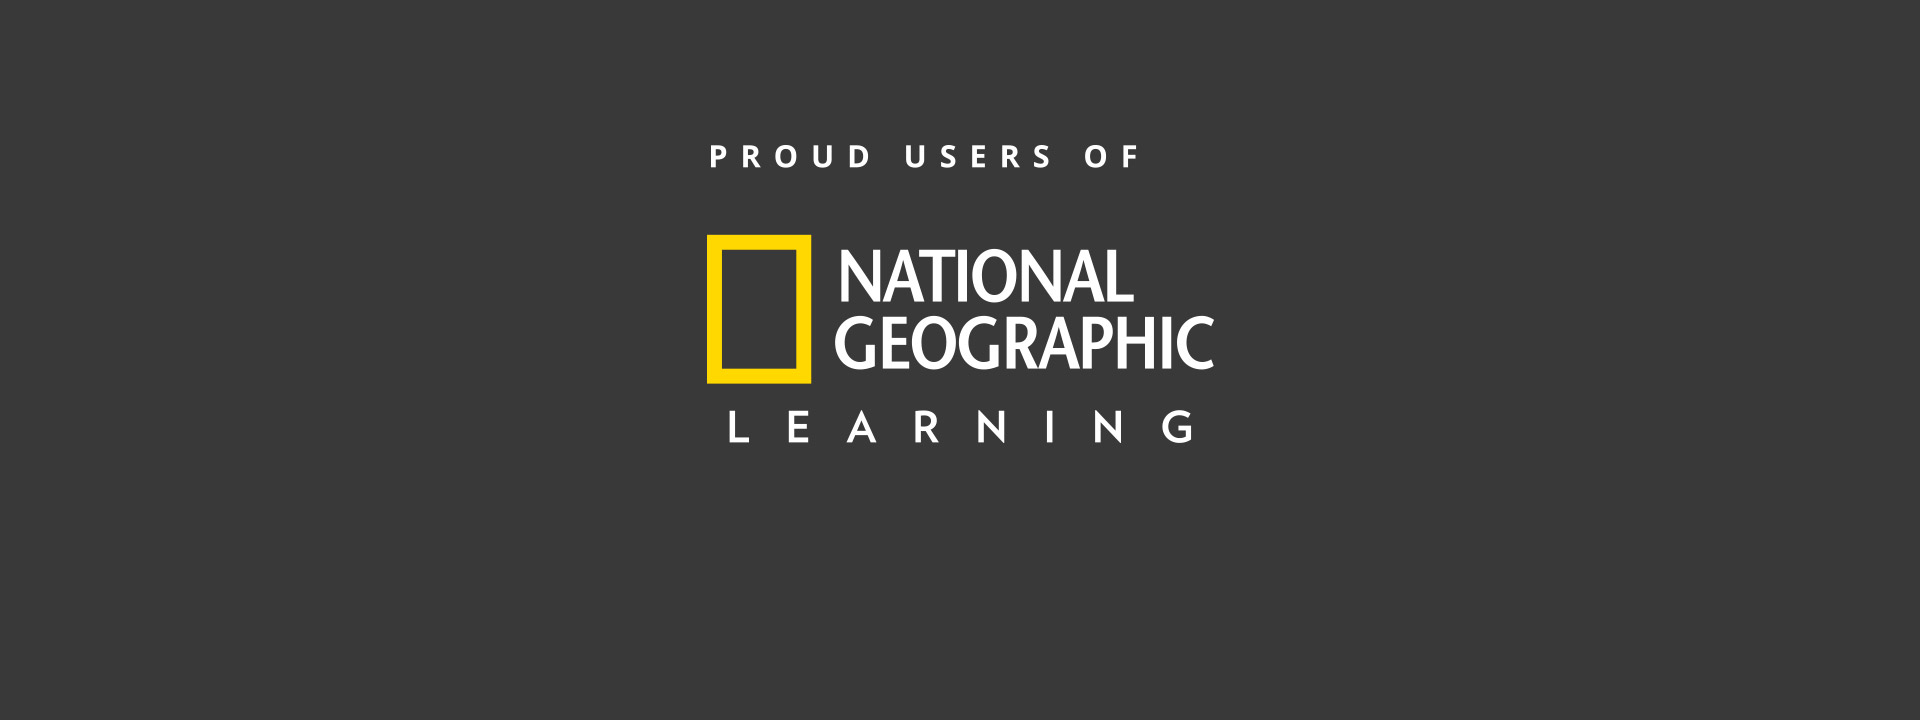 SJO Focus - National Geographic Learning